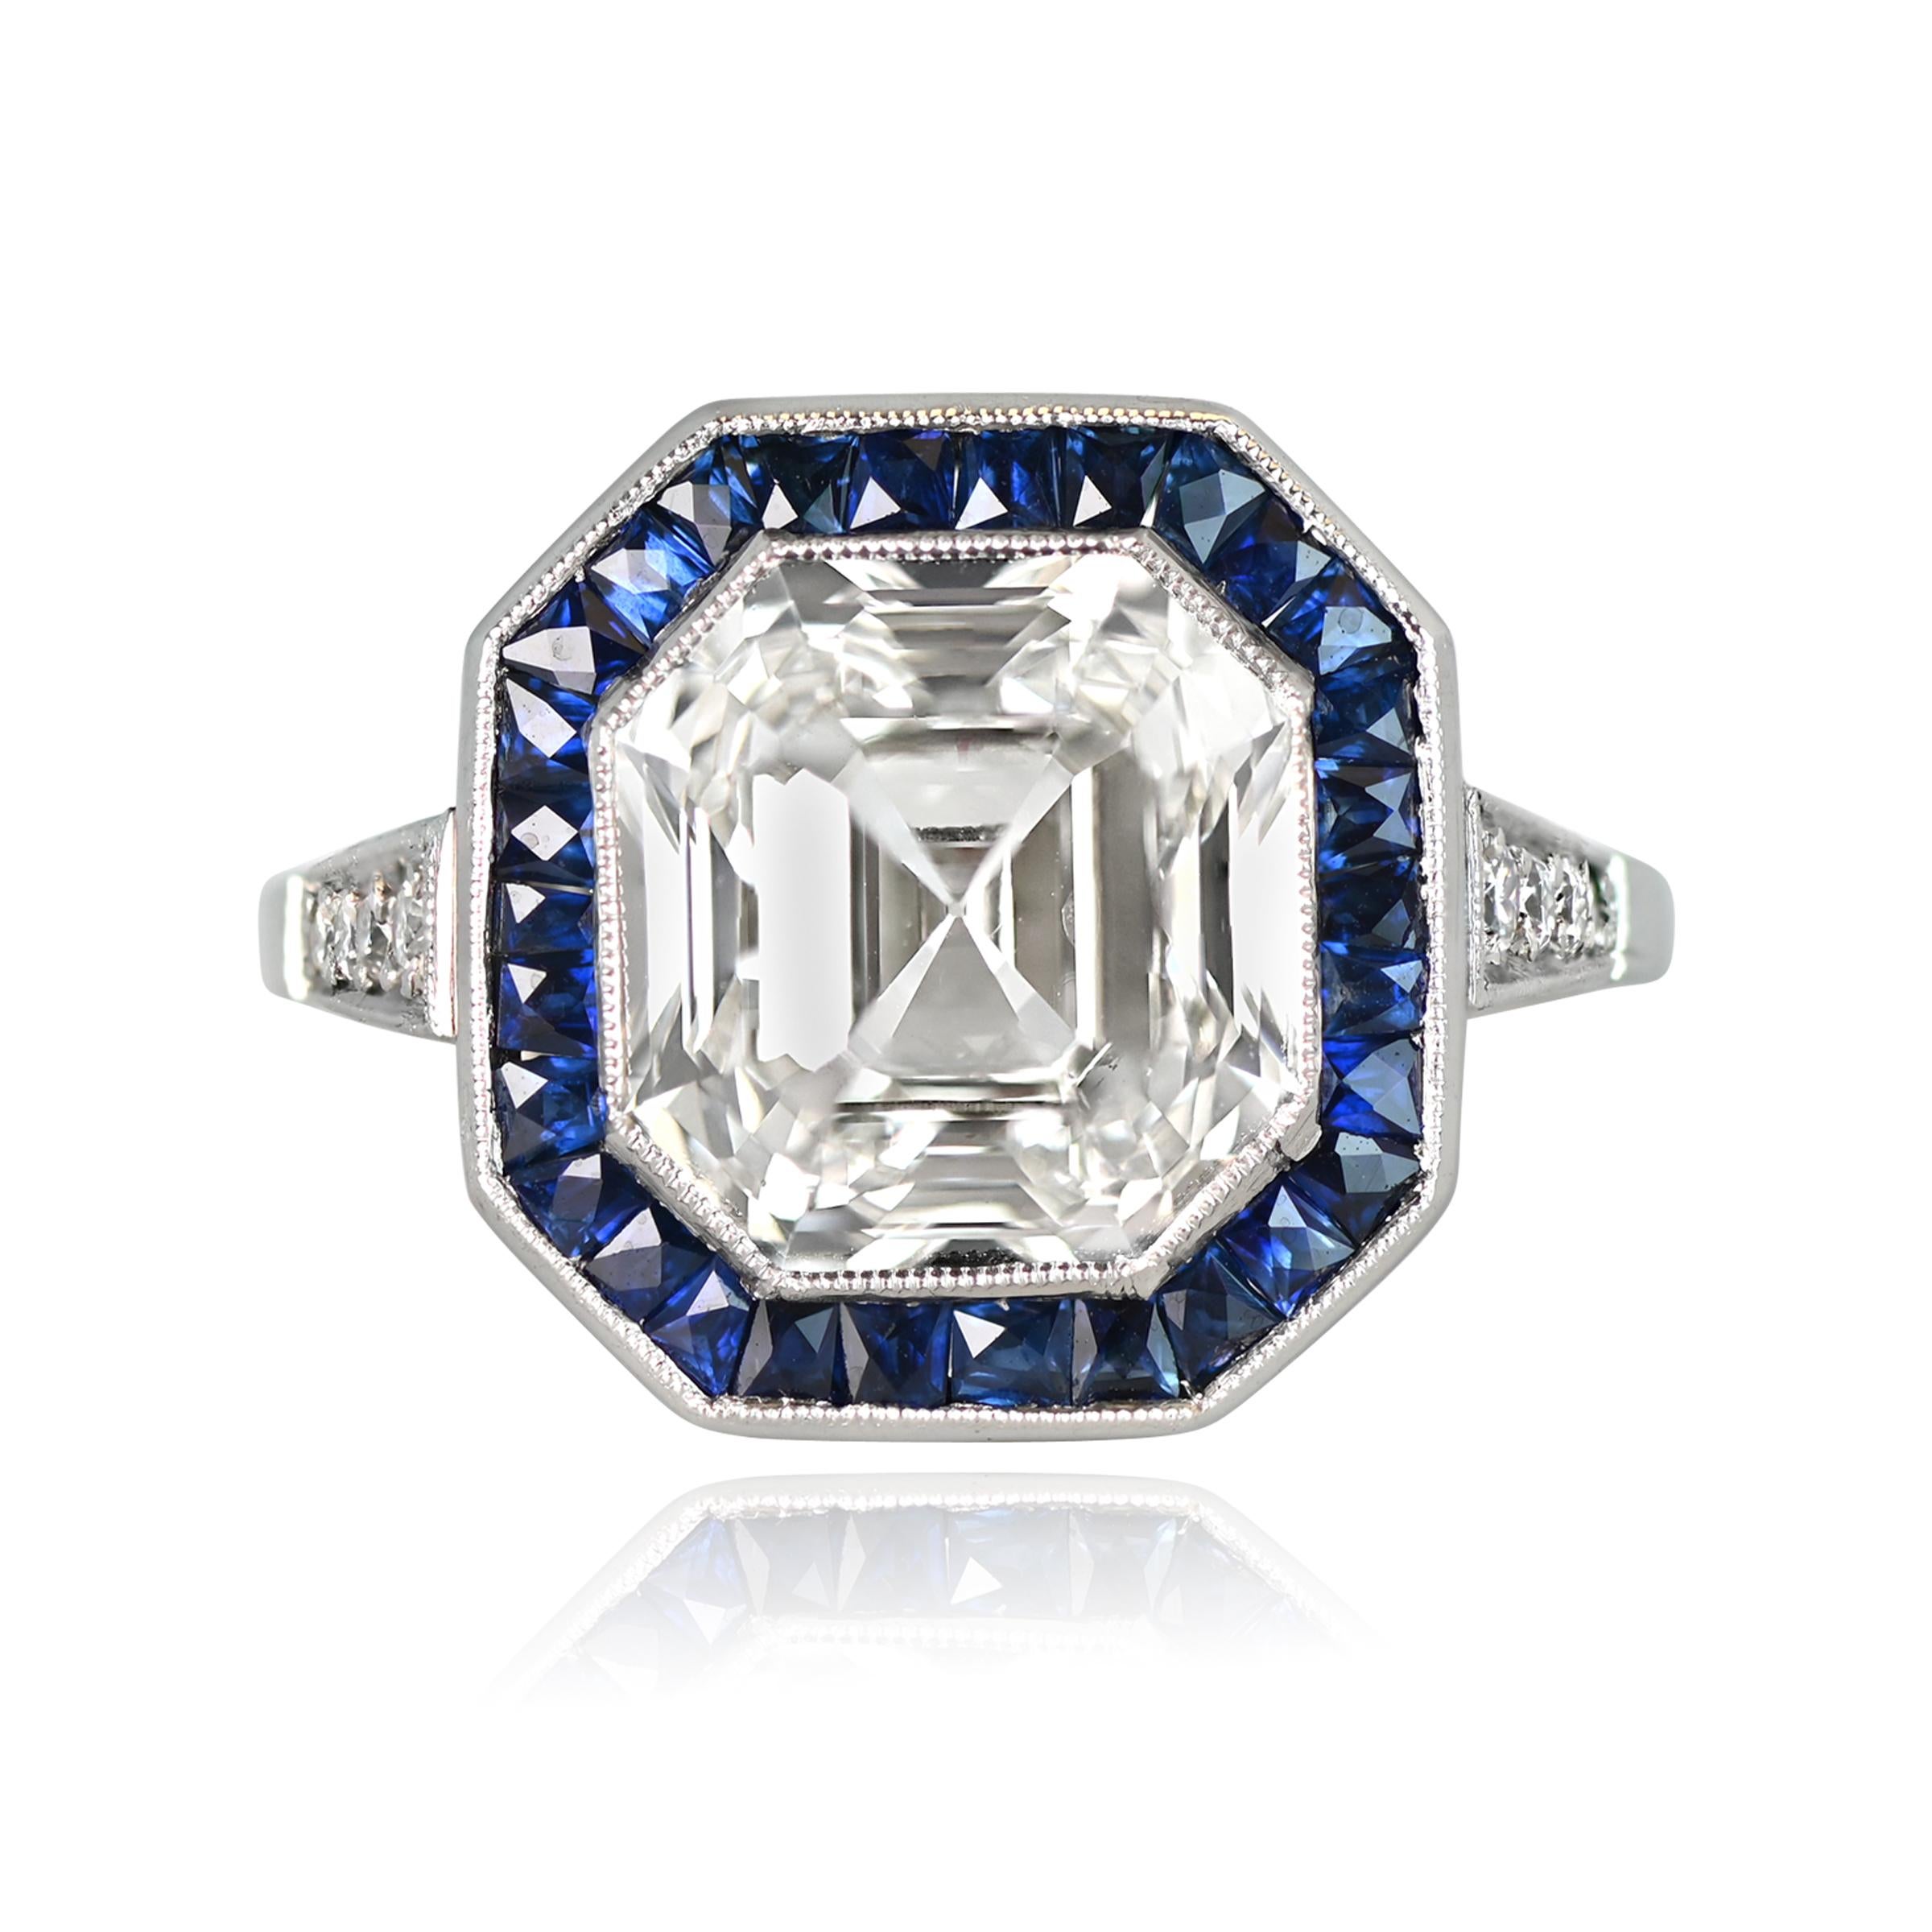 This captivating ring boasts an Asscher cut diamond, weighing 5.03 carats, with a K color and VS2 clarity certification from GIA. The center stone is surrounded by a stunning halo of French cut sapphires, while four old European cut diamonds are